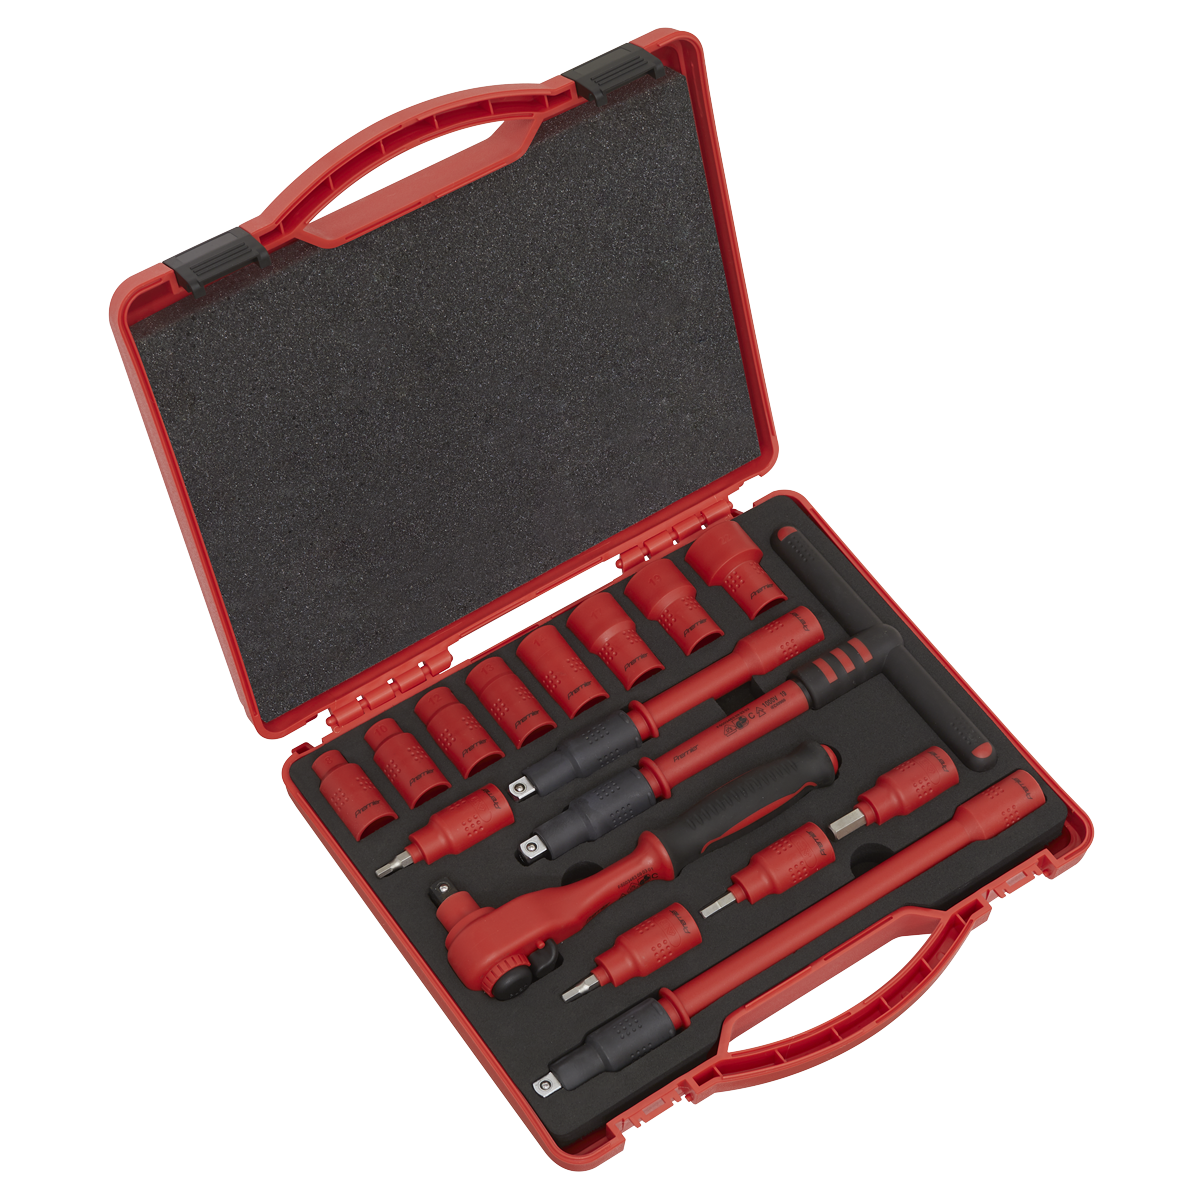 Sealey Insulated Socket Set 16pc 3/8"Sq Drive 6pt WallDrive® VDE Approved